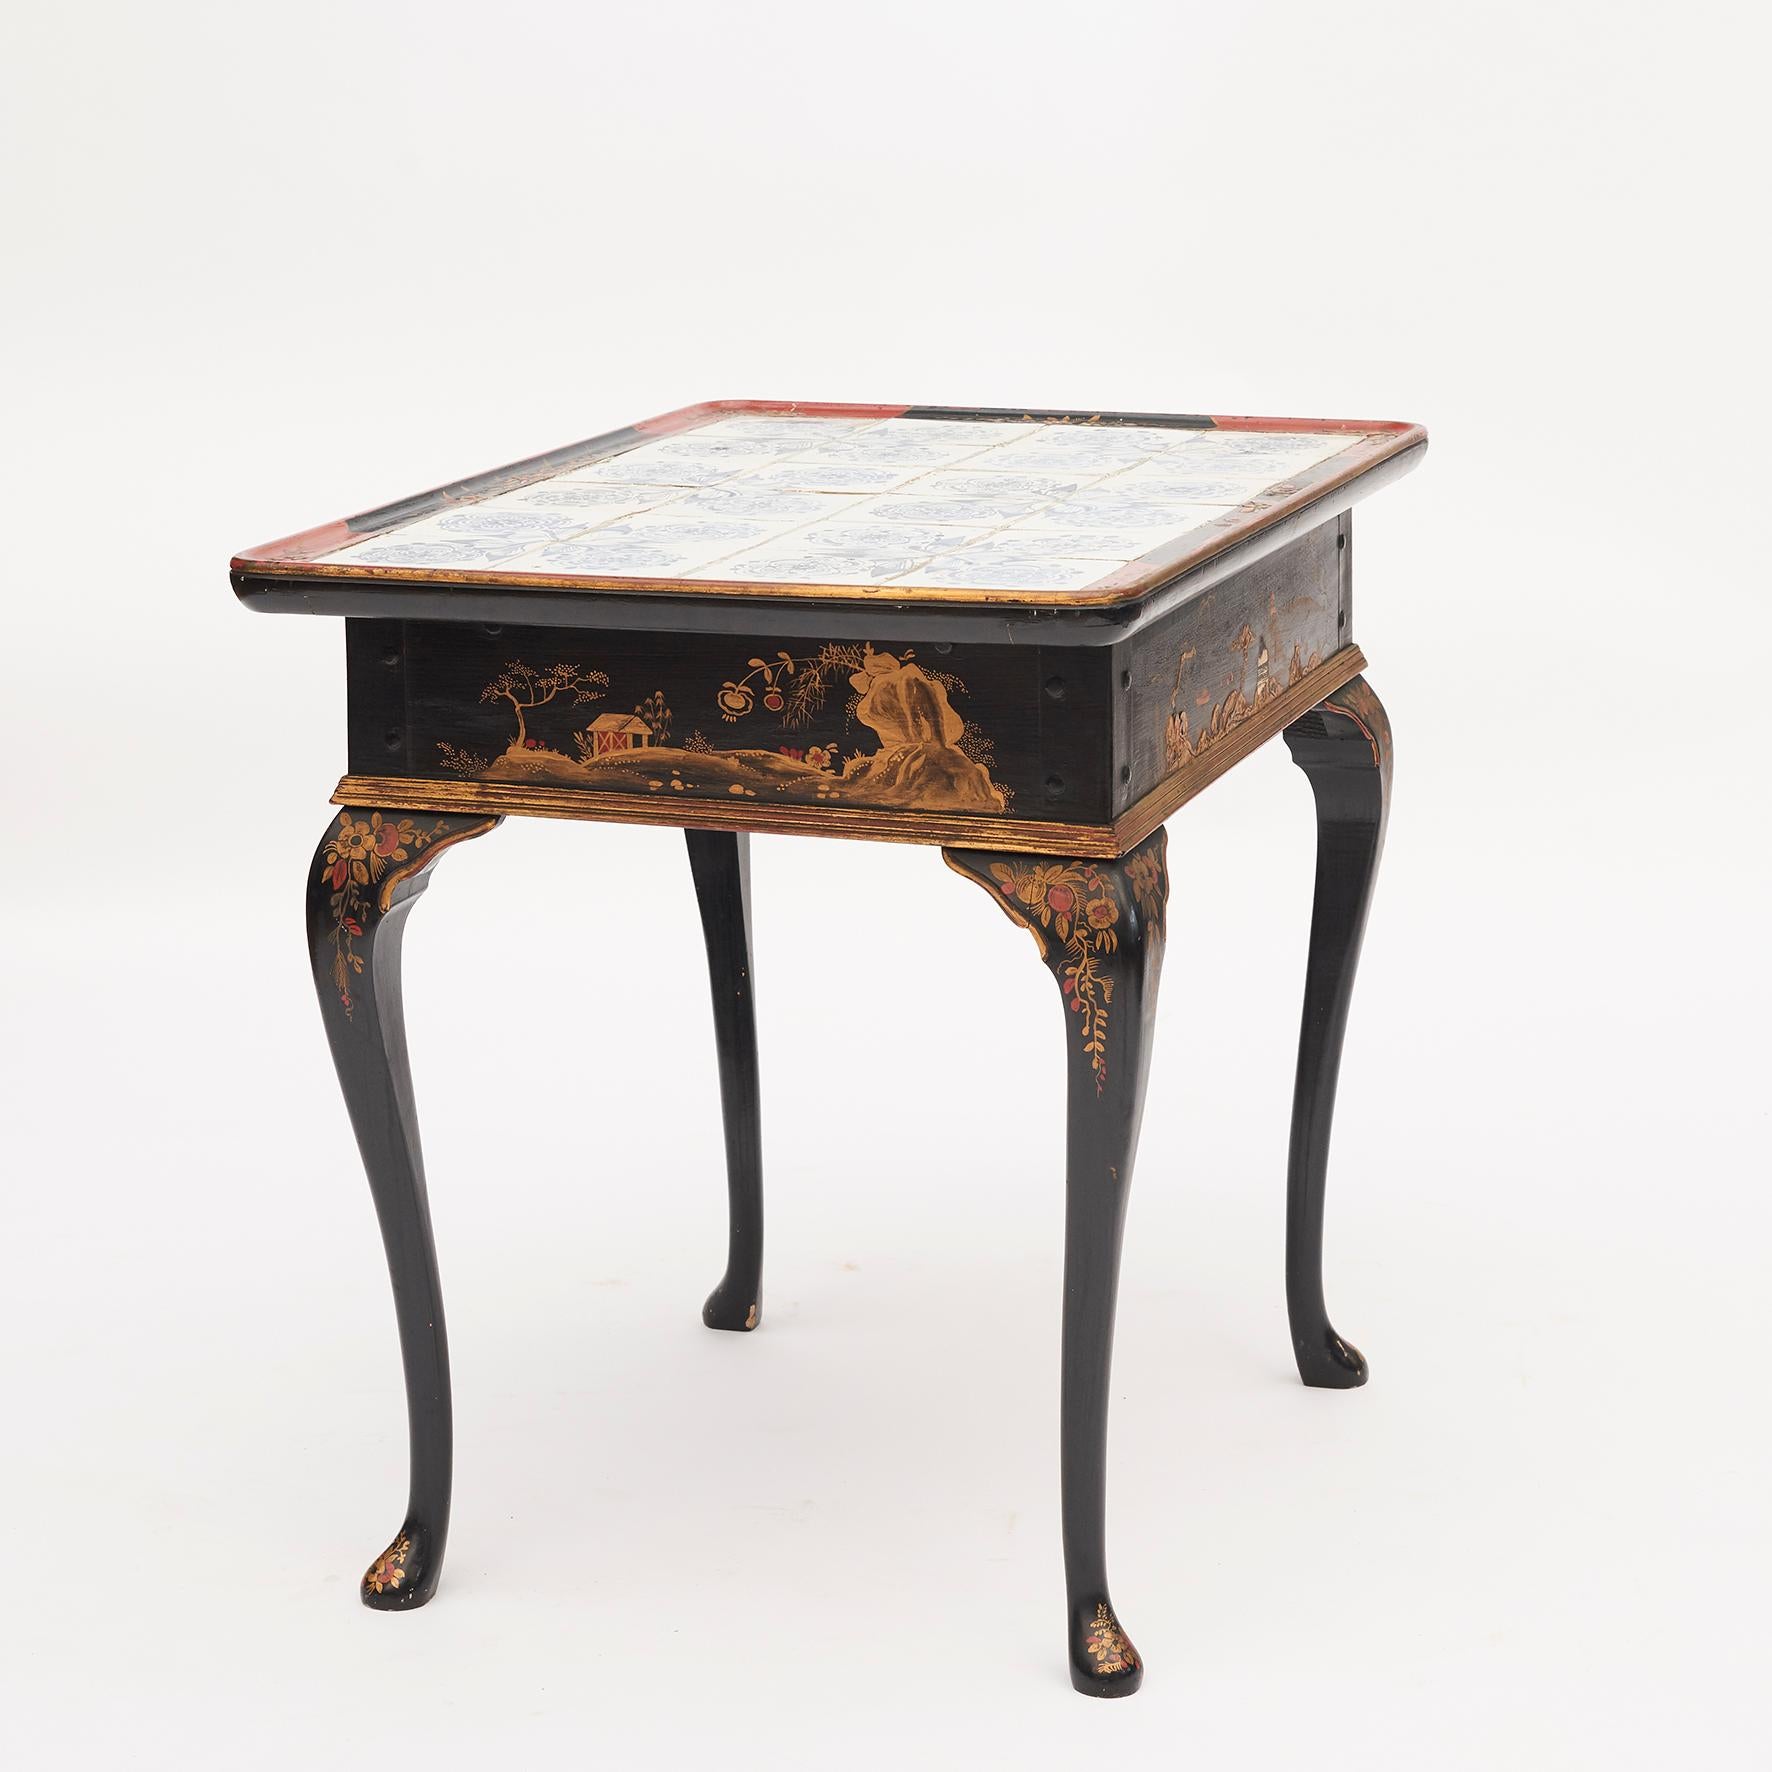 18th Century Danish Rococo Tile-Top Table with Chinese Motifs